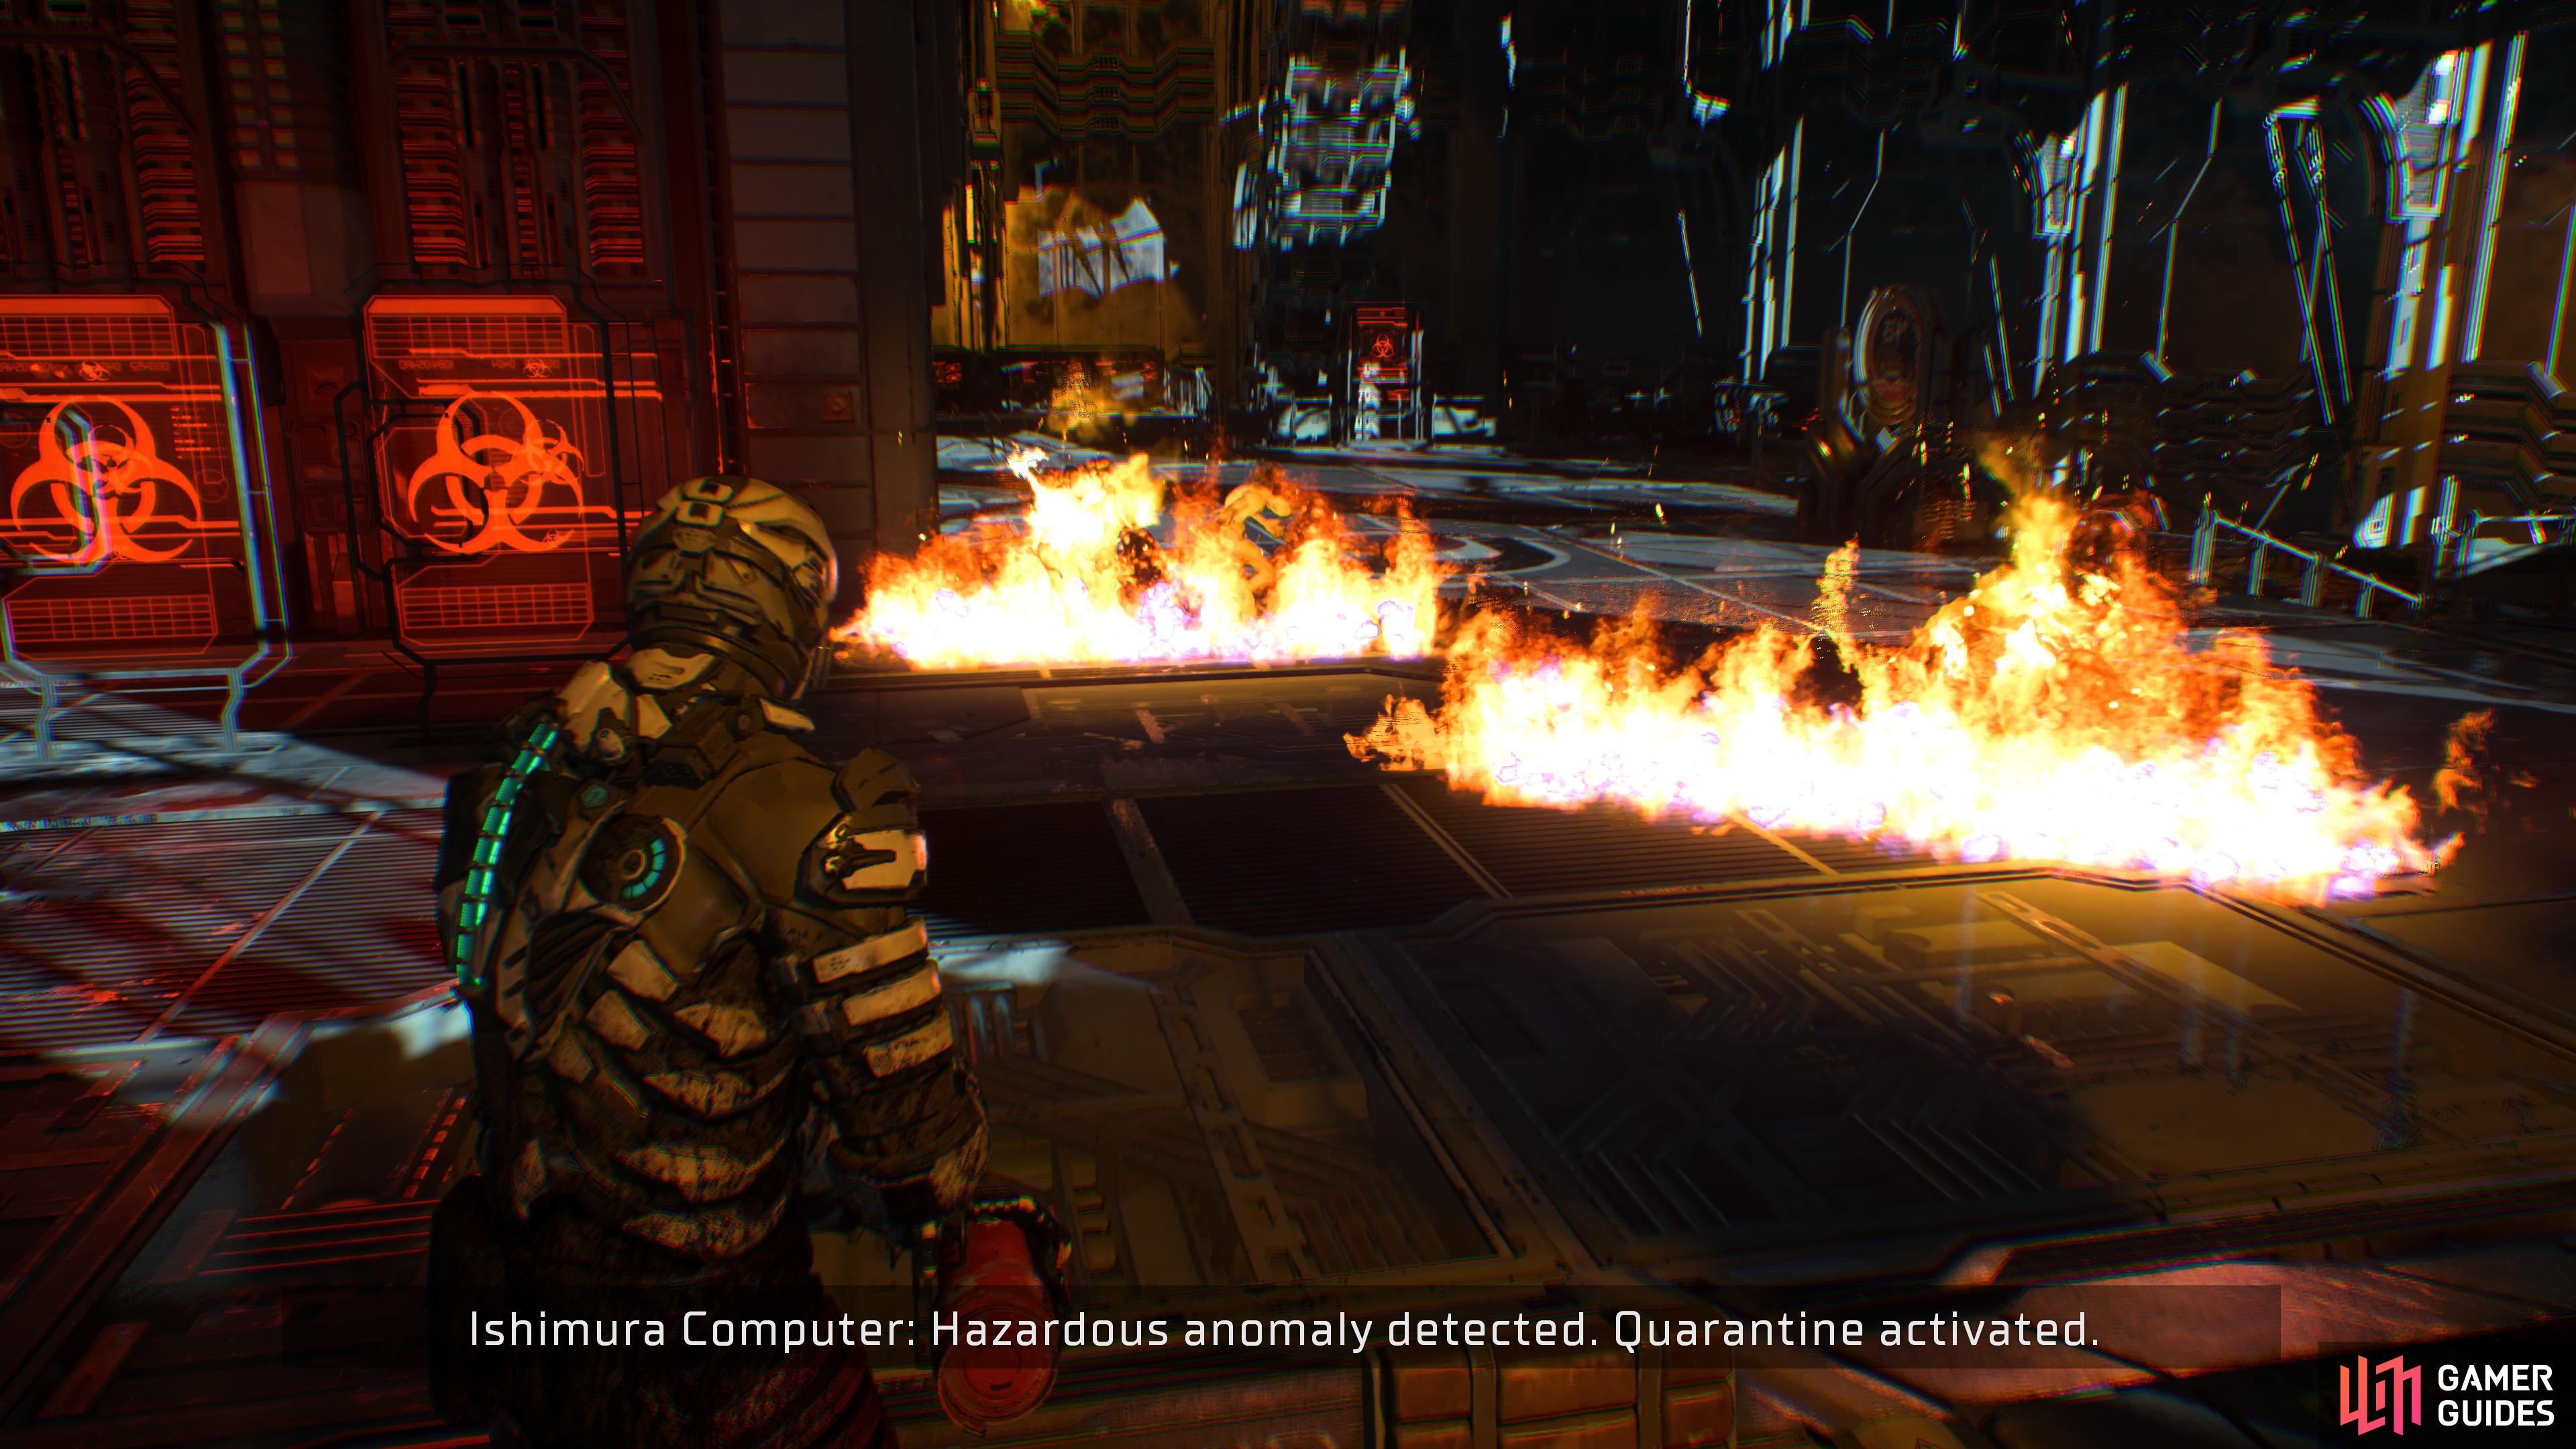 The Flamethrower's Alternate Fire will lay lines of flames on the floor that persist.